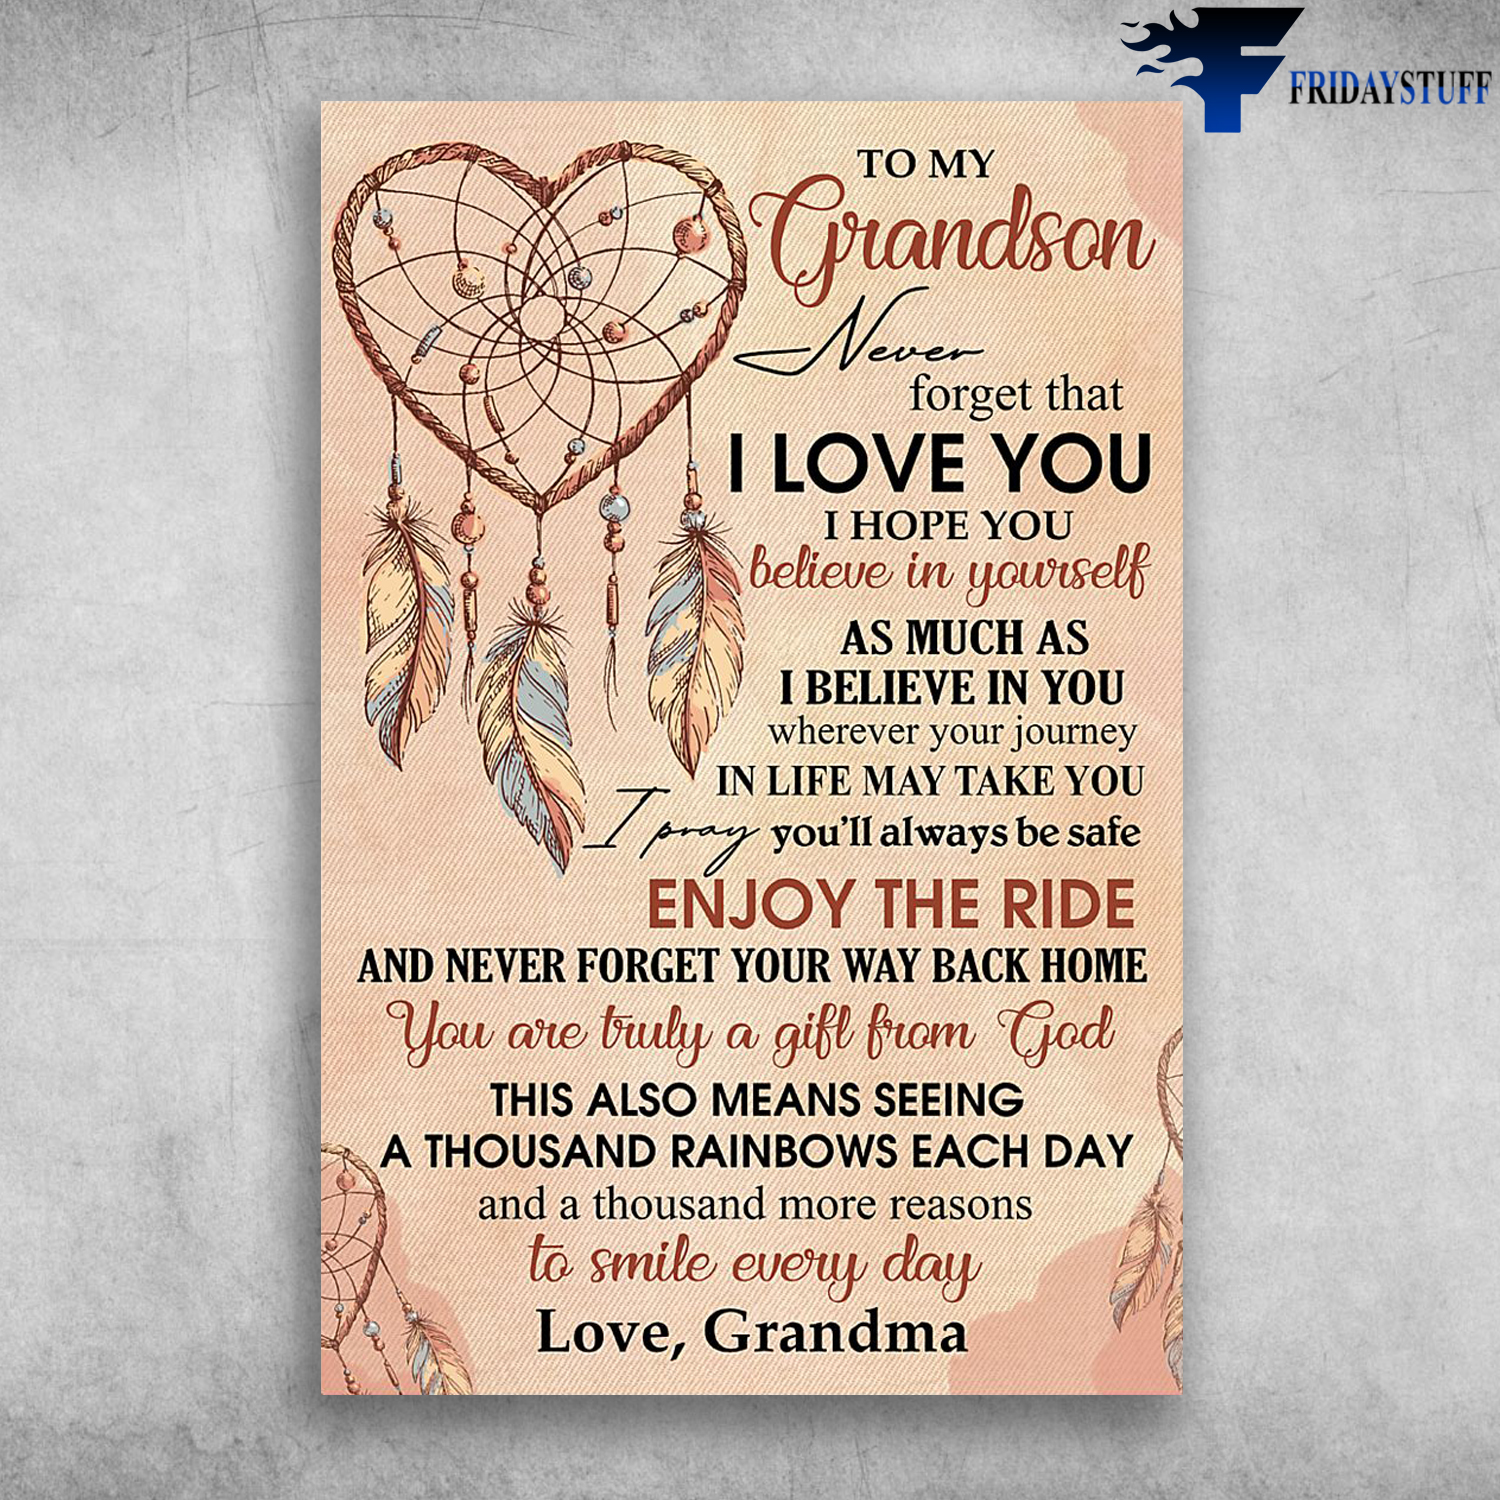 Love Dream Catcher To My Grandson Never Forget That I Love You Love Grandma